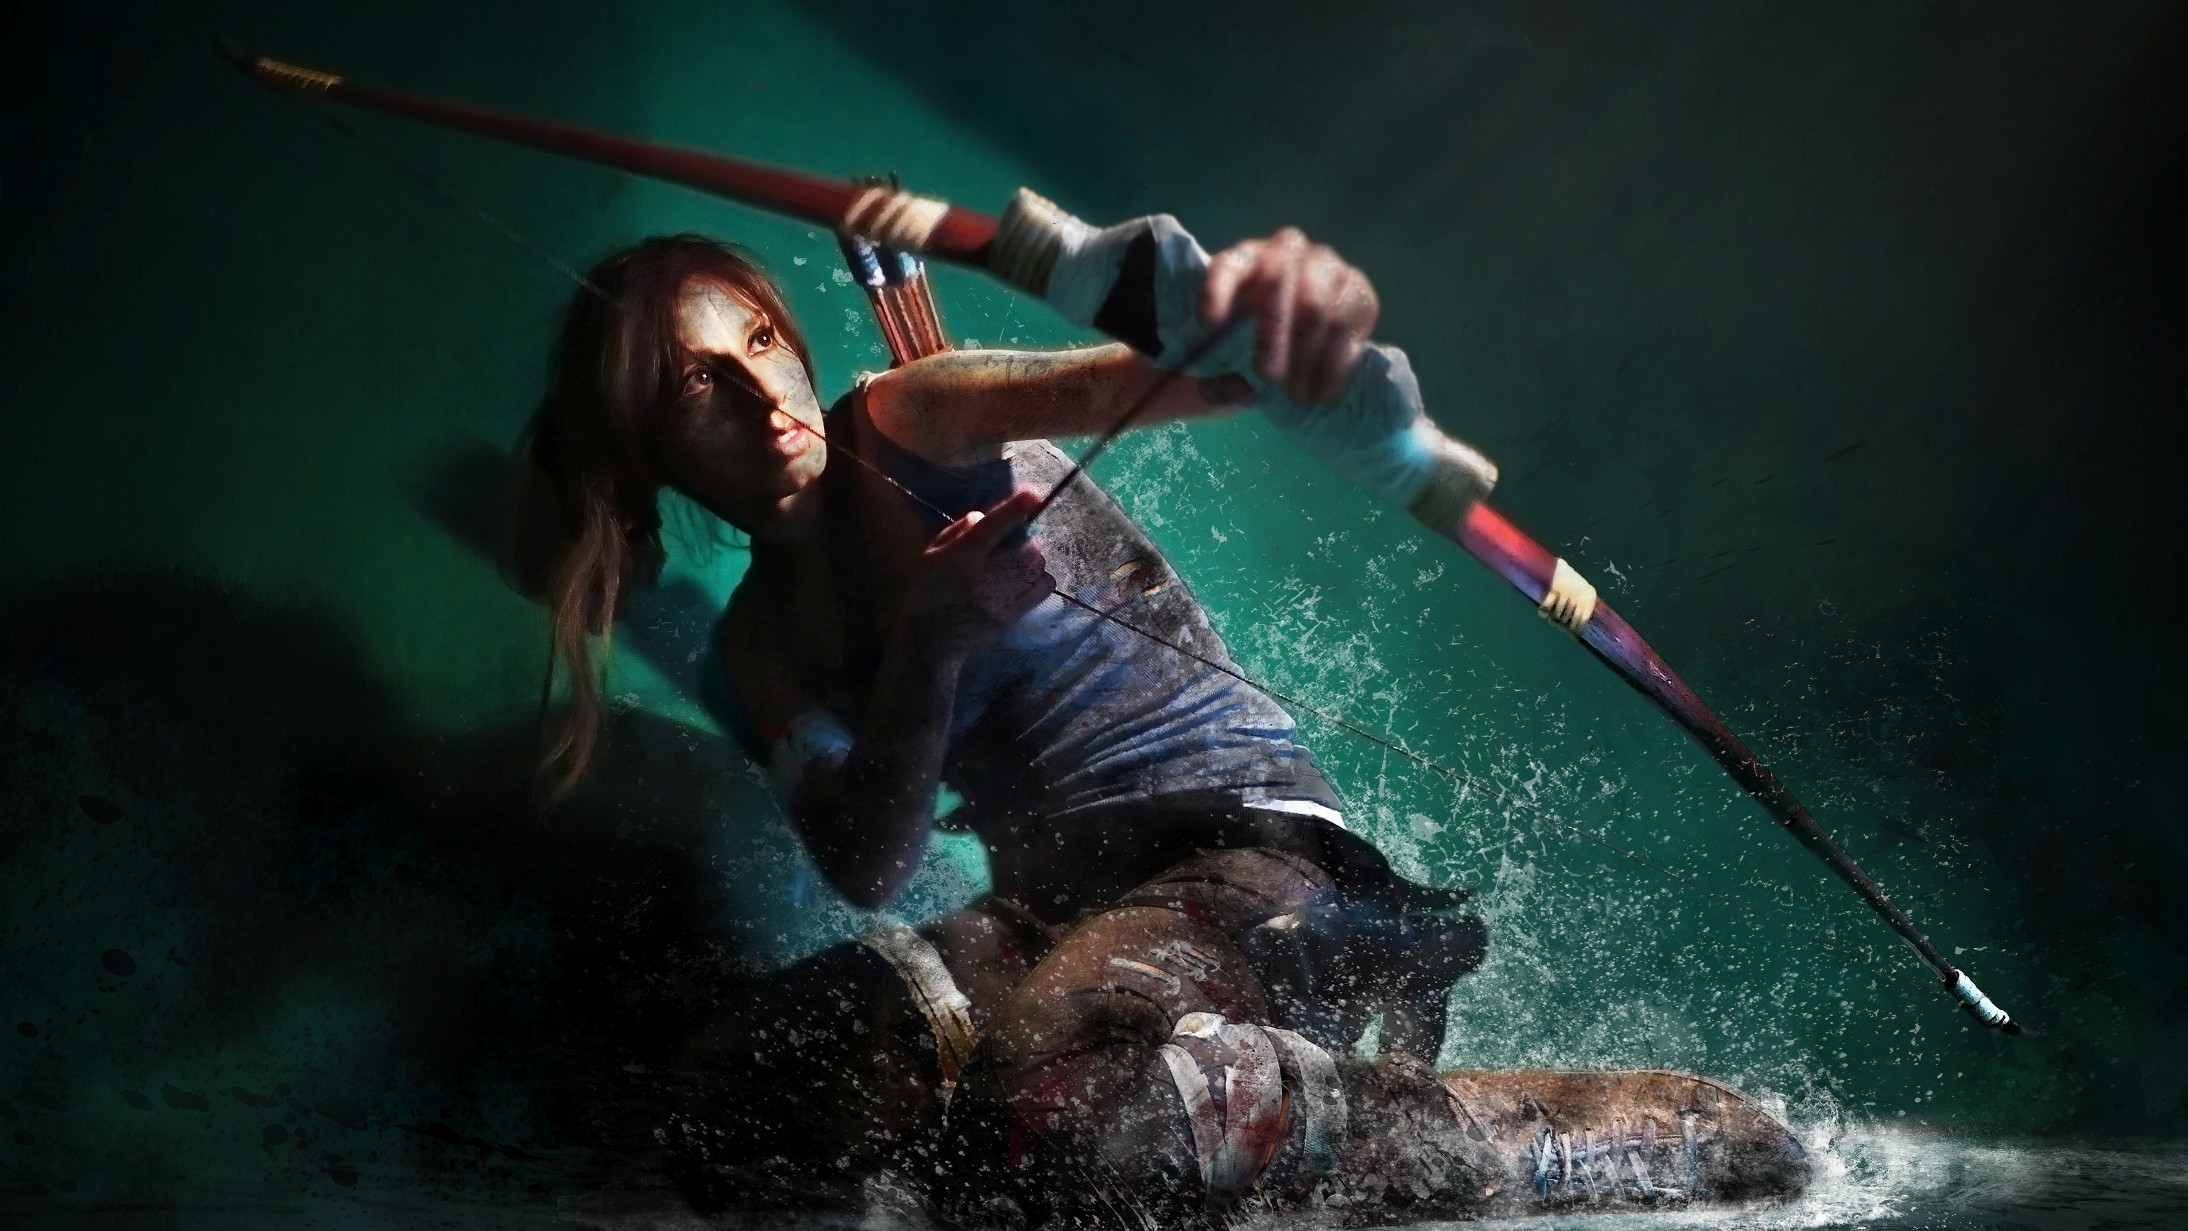 People 2188x1231 cosplay model women video game girls video games PC gaming bow Lara Croft (Tomb Raider) bow and arrow video game characters